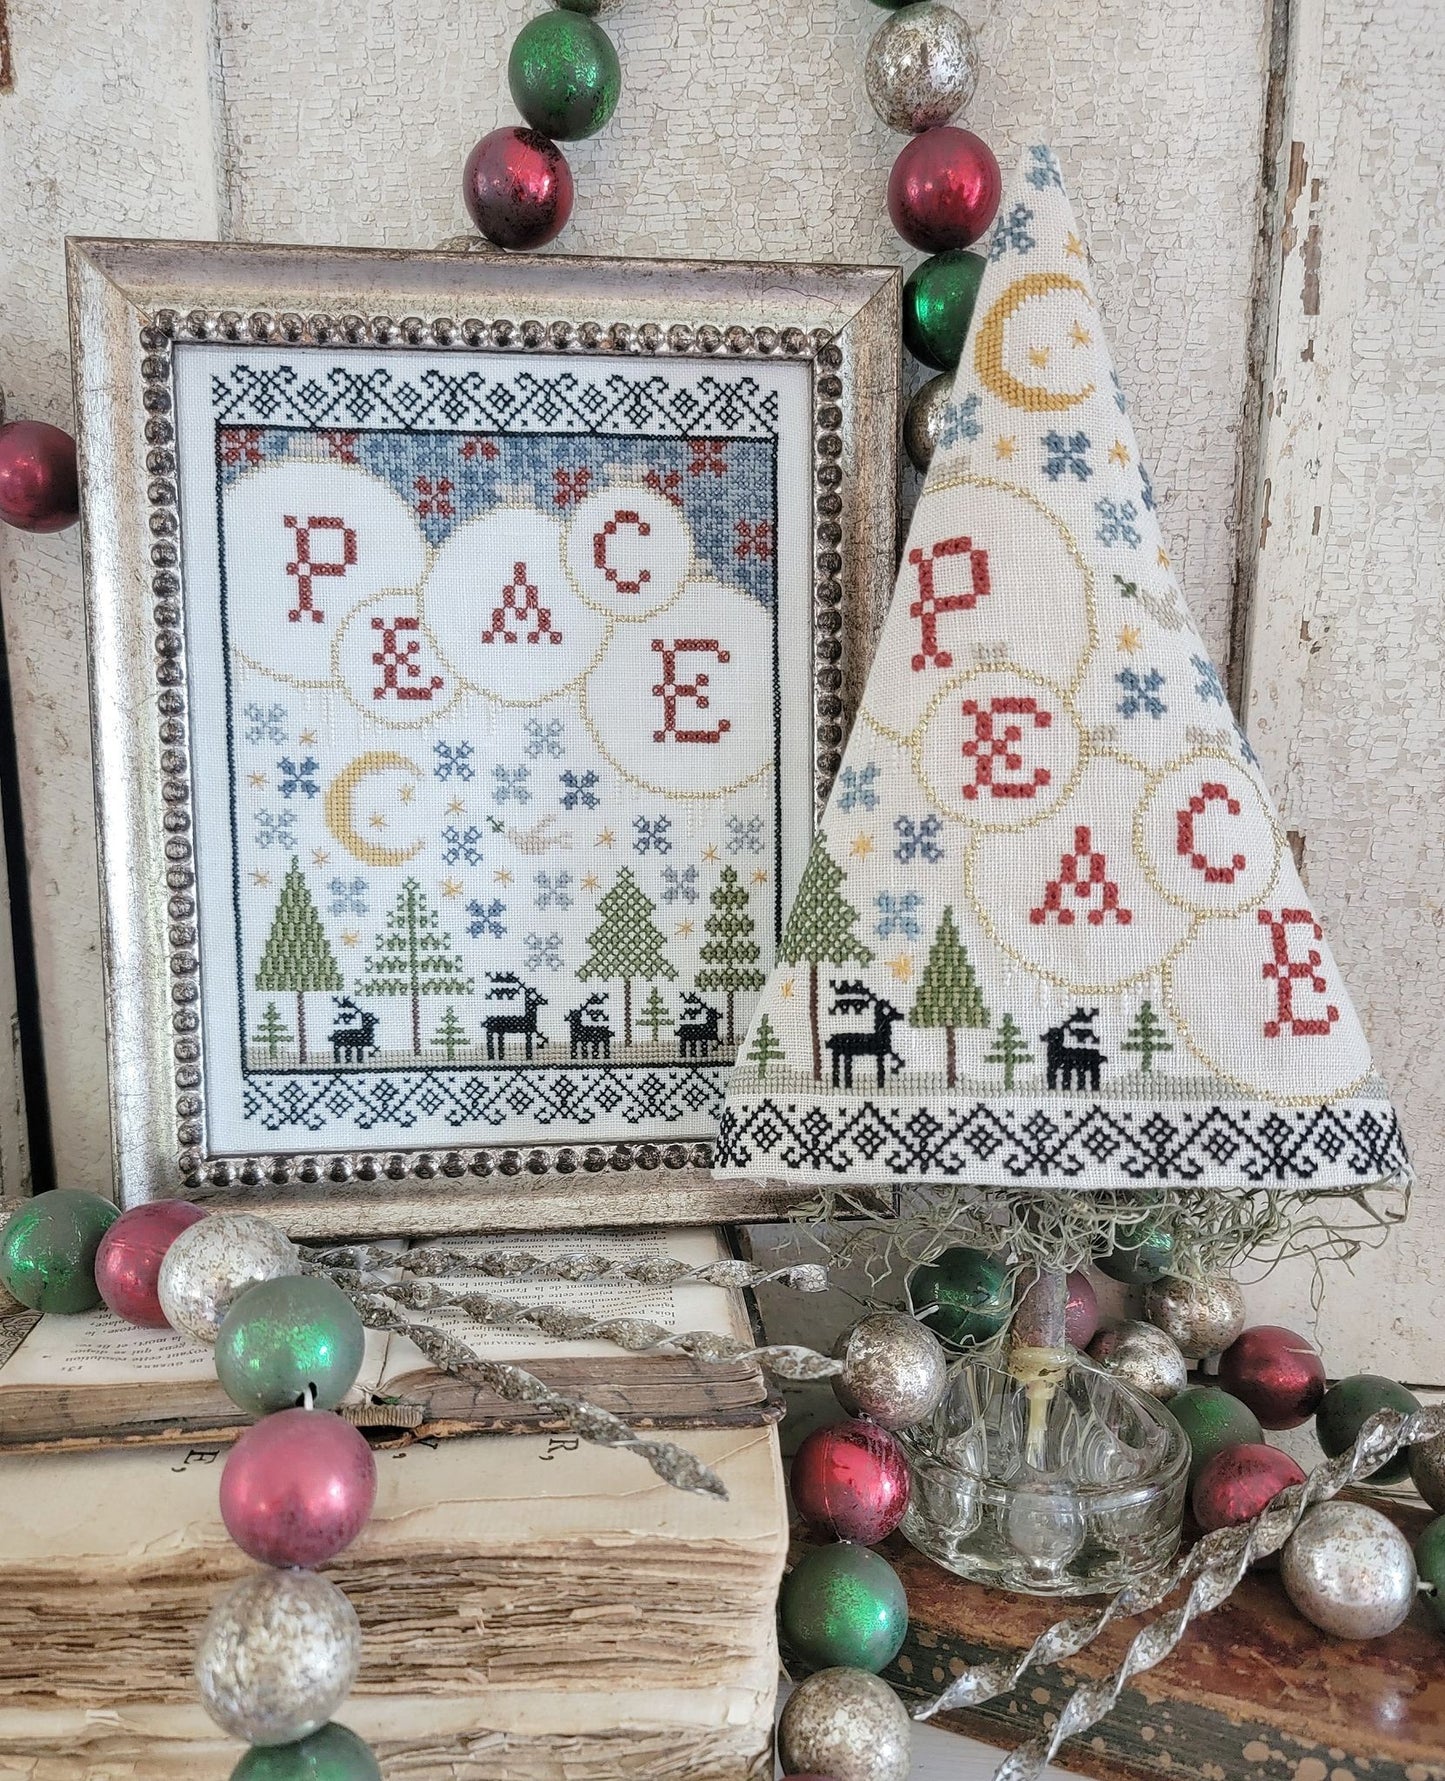 Fifth Day of Christmas Sampler and Tree - Cross Stitch Pattern